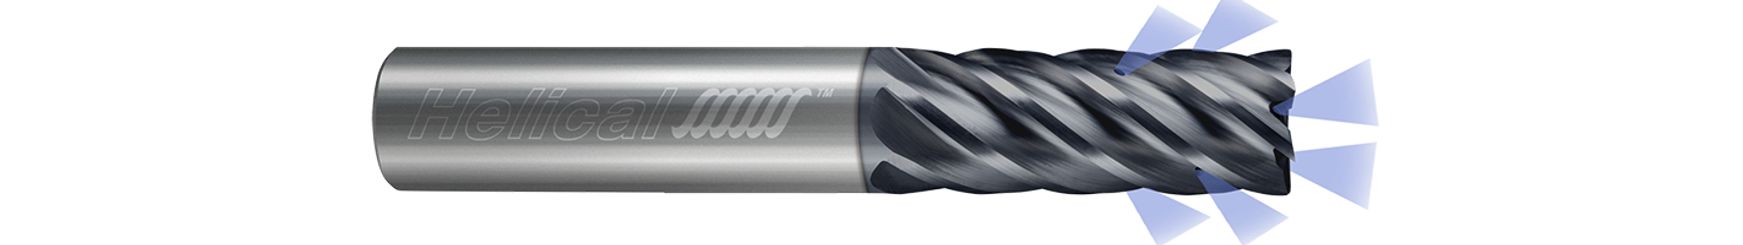 6 Flute-Corner Radius-Coolant Through-Variable Pitch-For High Efficiency Milling